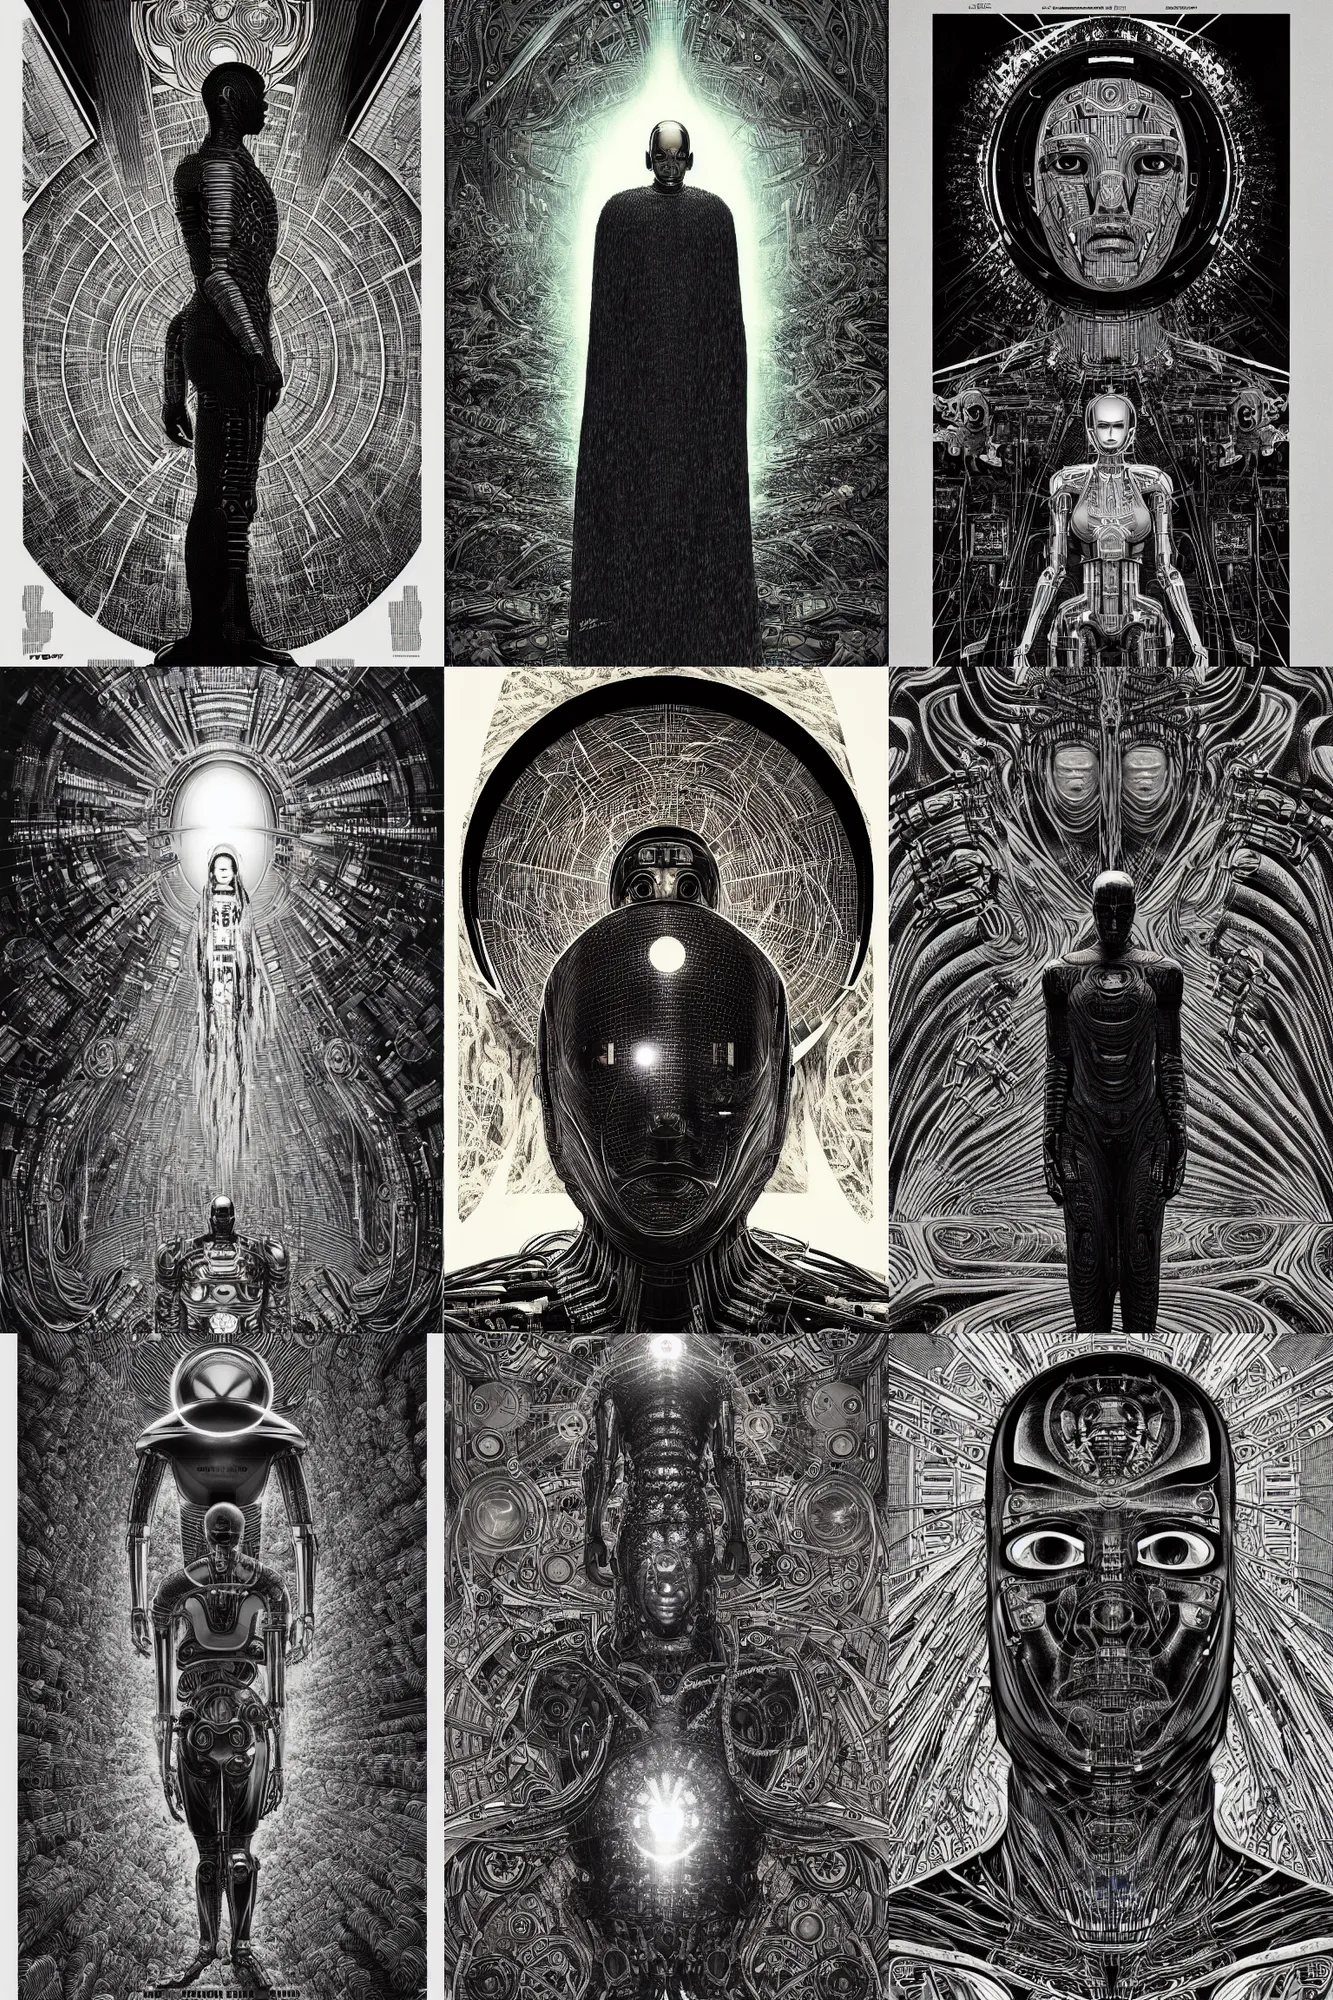 Prompt: i, robot movie poster concept art, designed by joe perez of donda creative, creative direction by virgil abloh, avant - garde, religious imagery, by virgil finlay, by gustave dore and junji ito